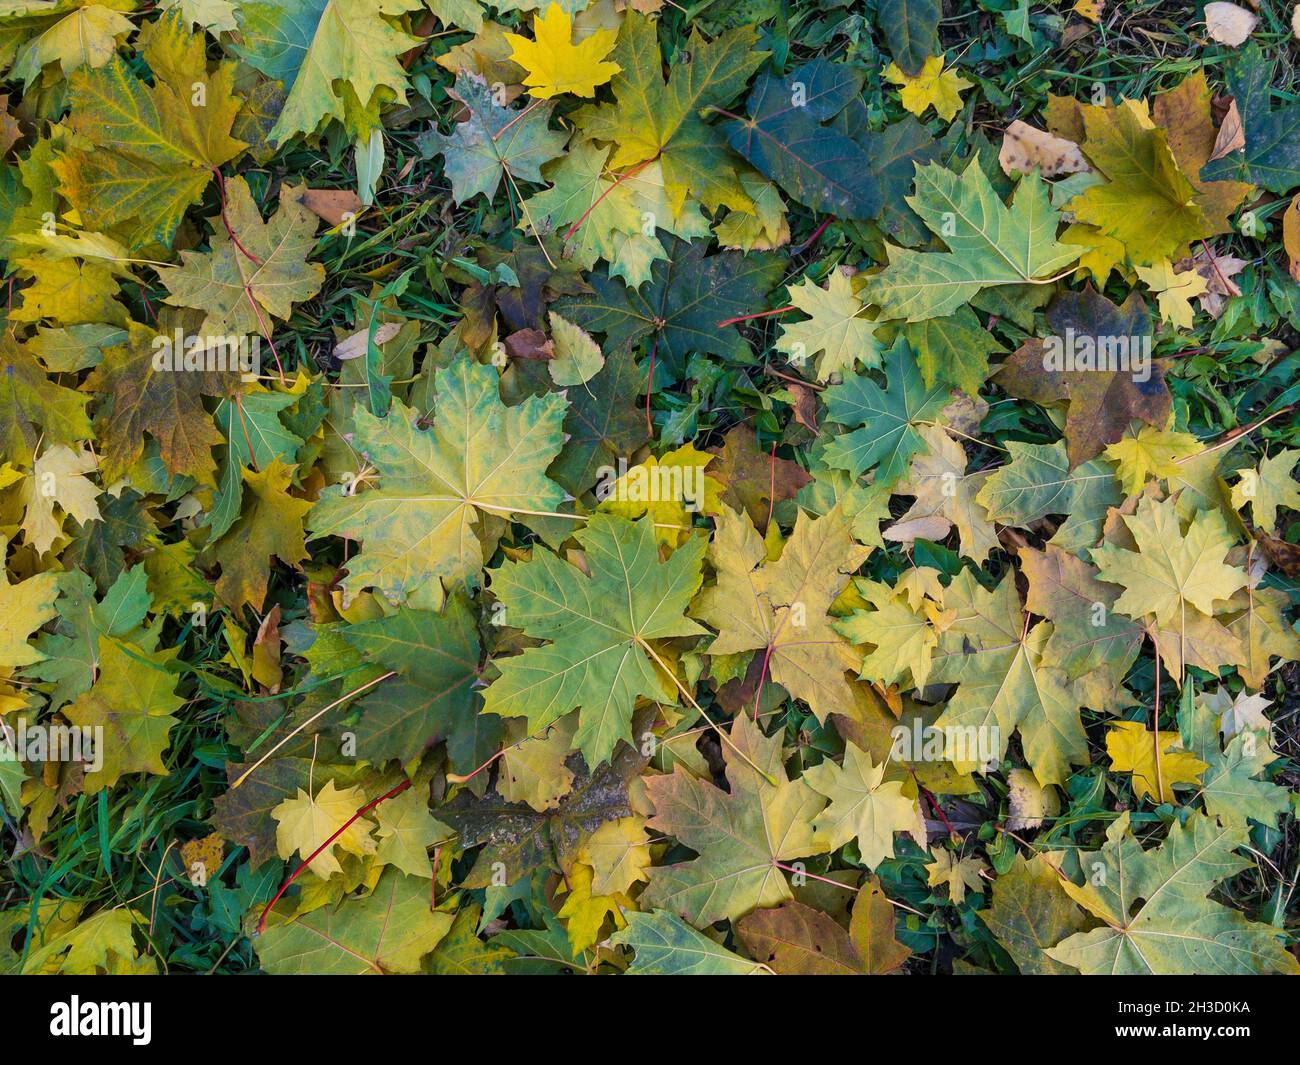 Background of fallen yellow, green and orange maple leaves Stock Photo